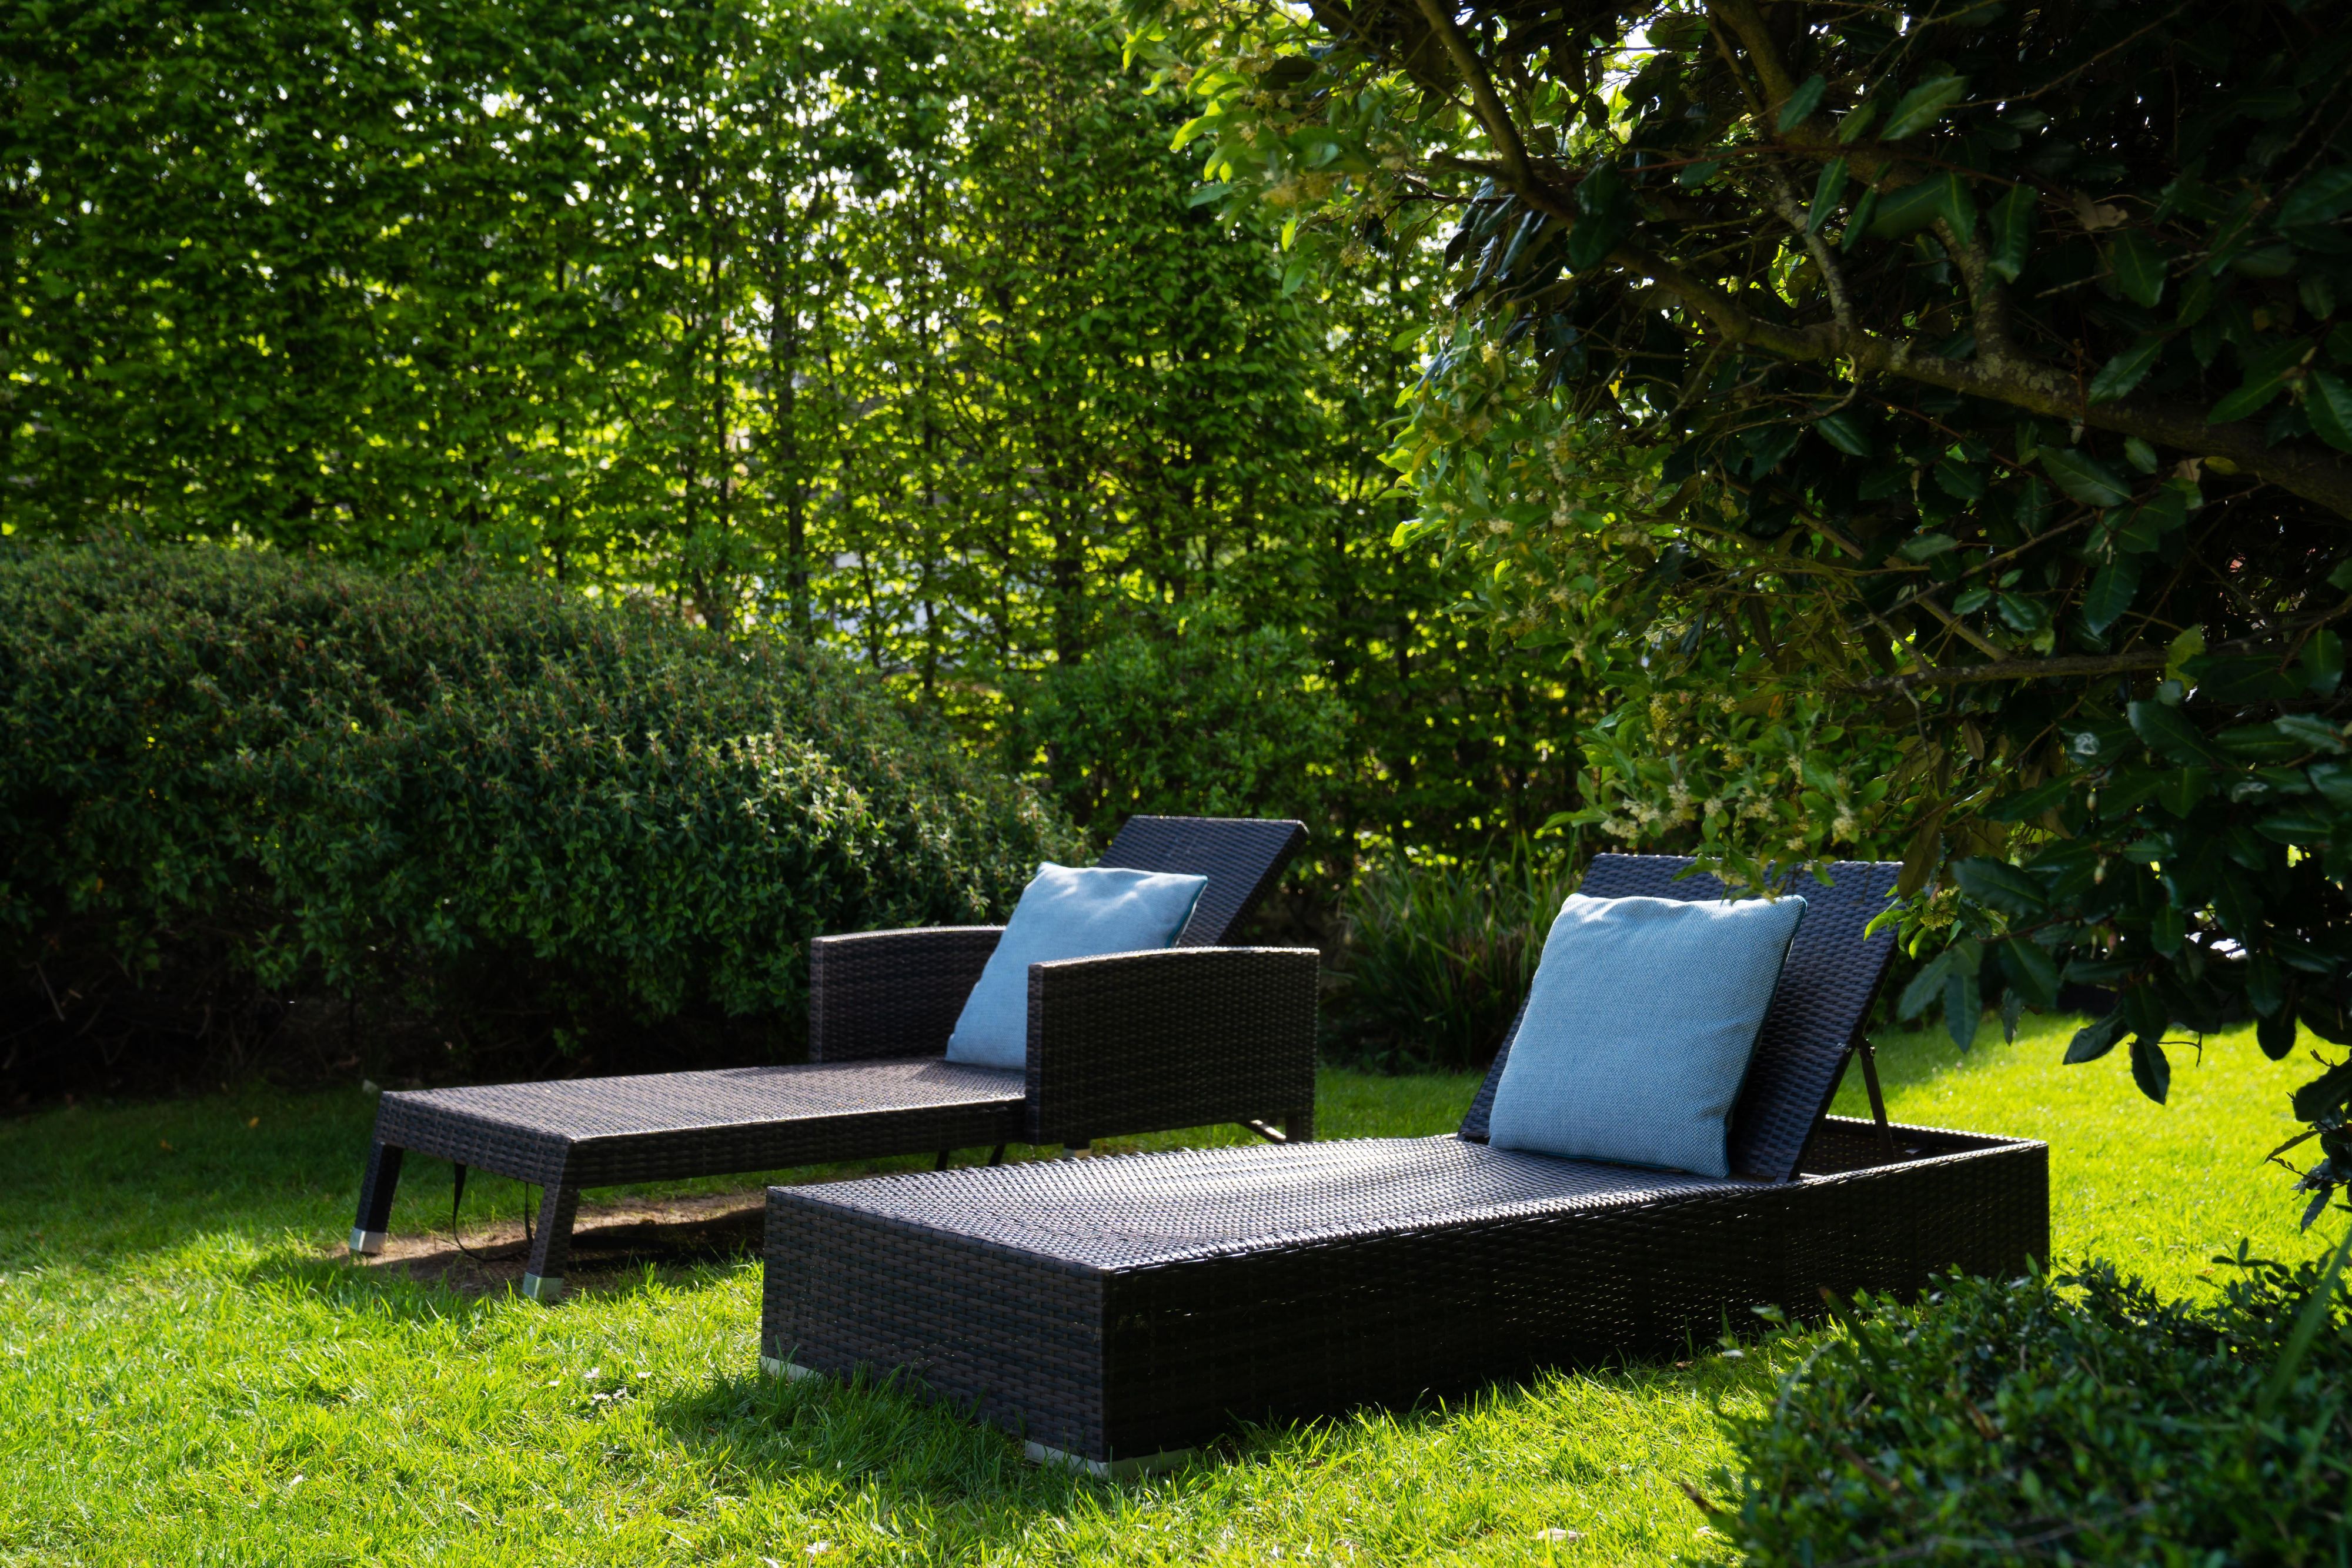 Secluded loungers in our garden for guest to relax on.